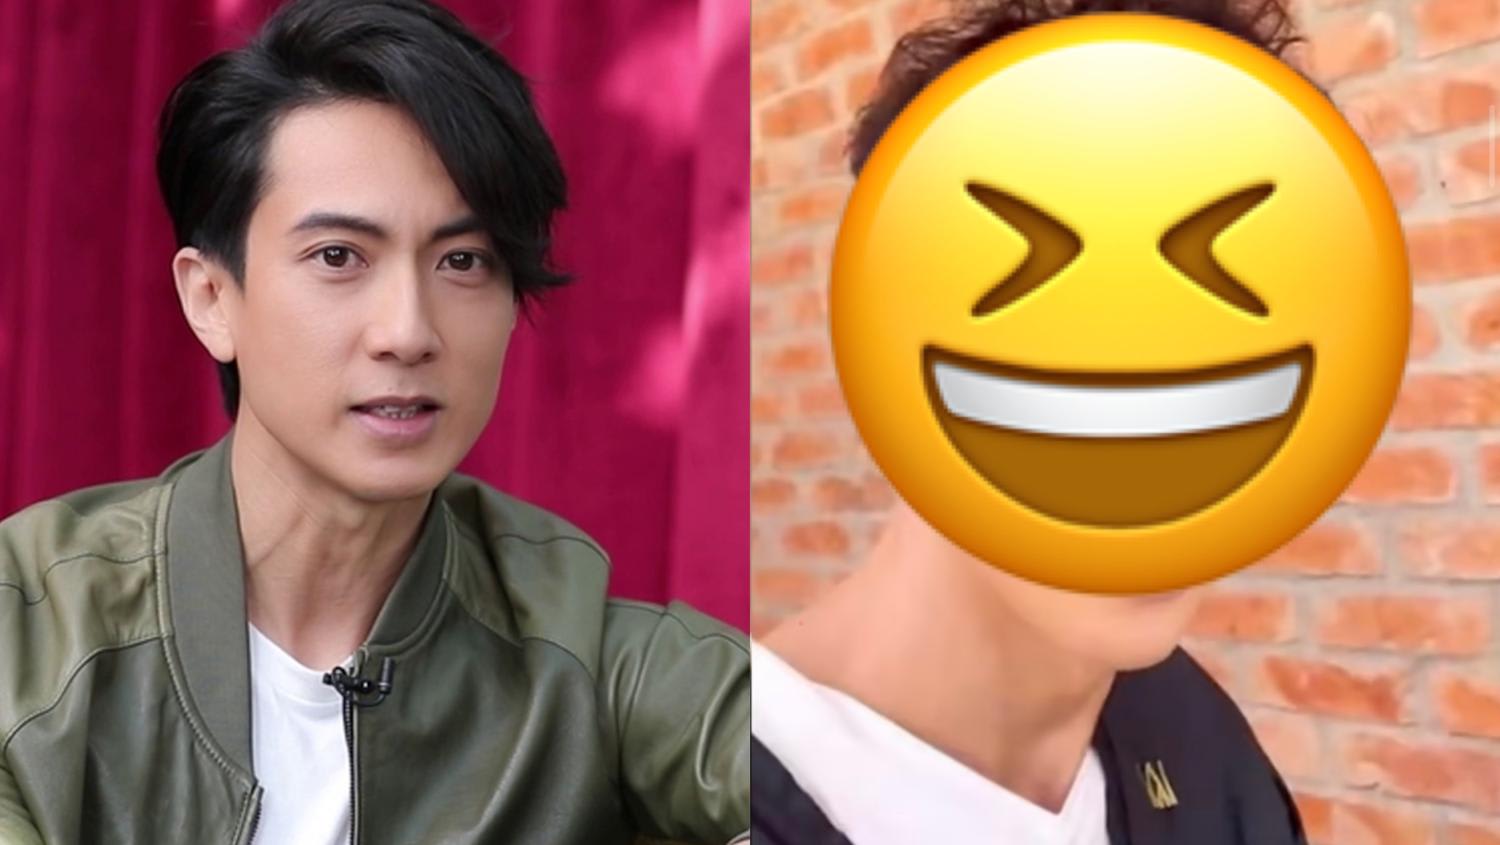 Wu Chun Has A New Hairstyle For Chinese New Year & Netizens Are Not Feeling It